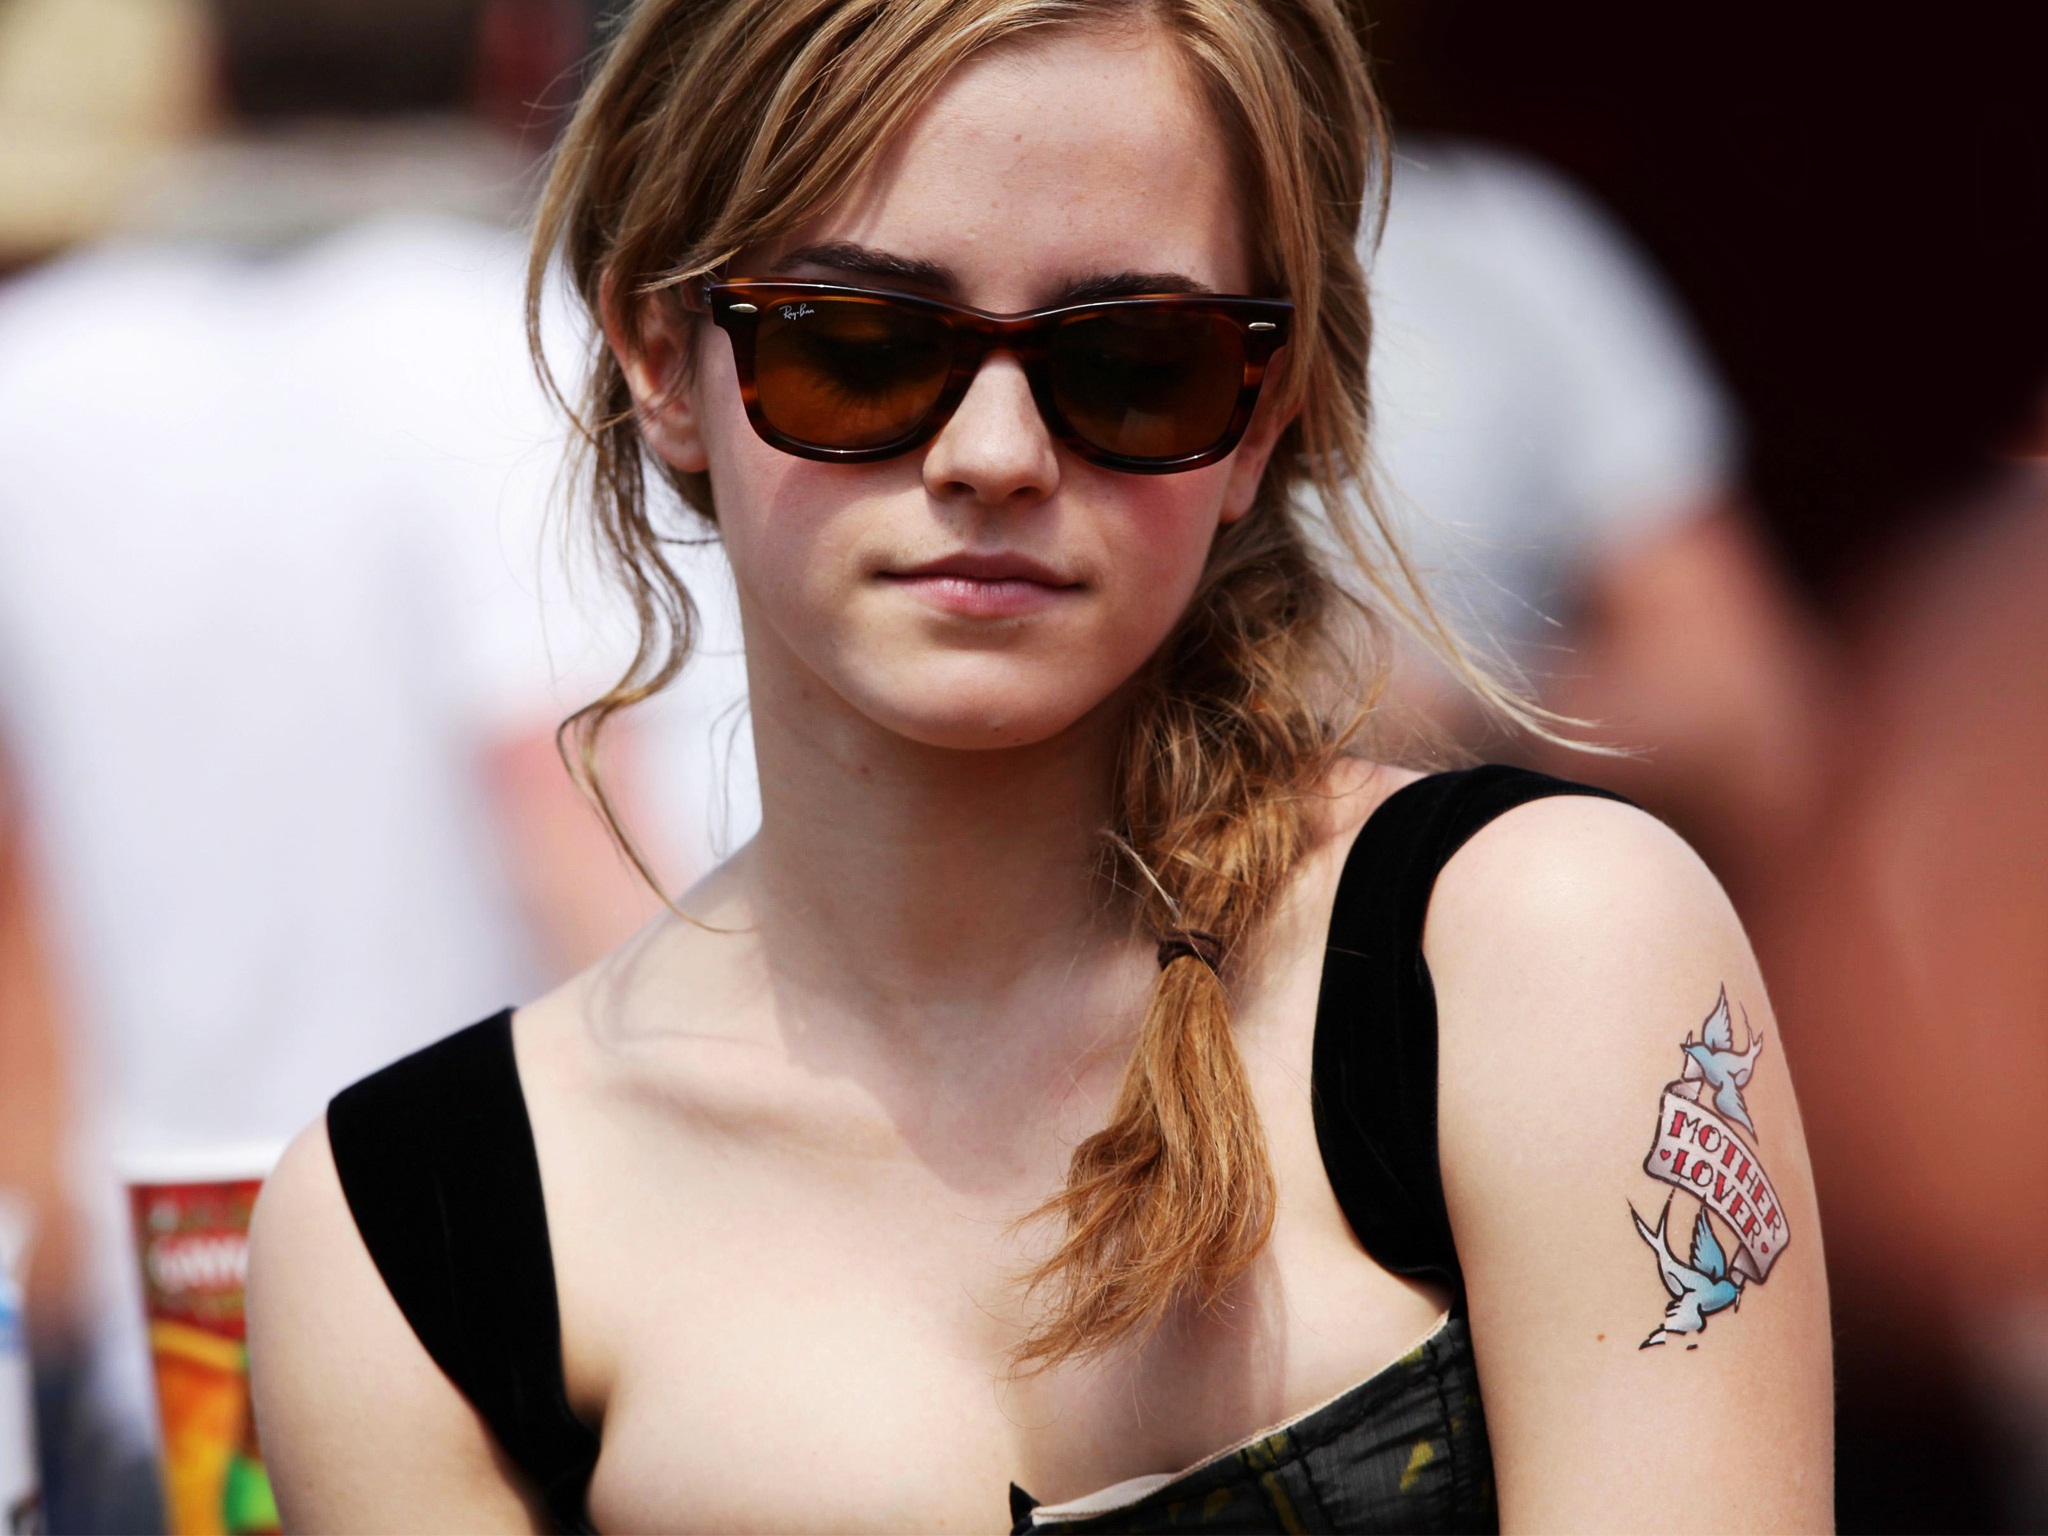 Top 10 Best Female Celebrity Tattoos 2019 Trends For